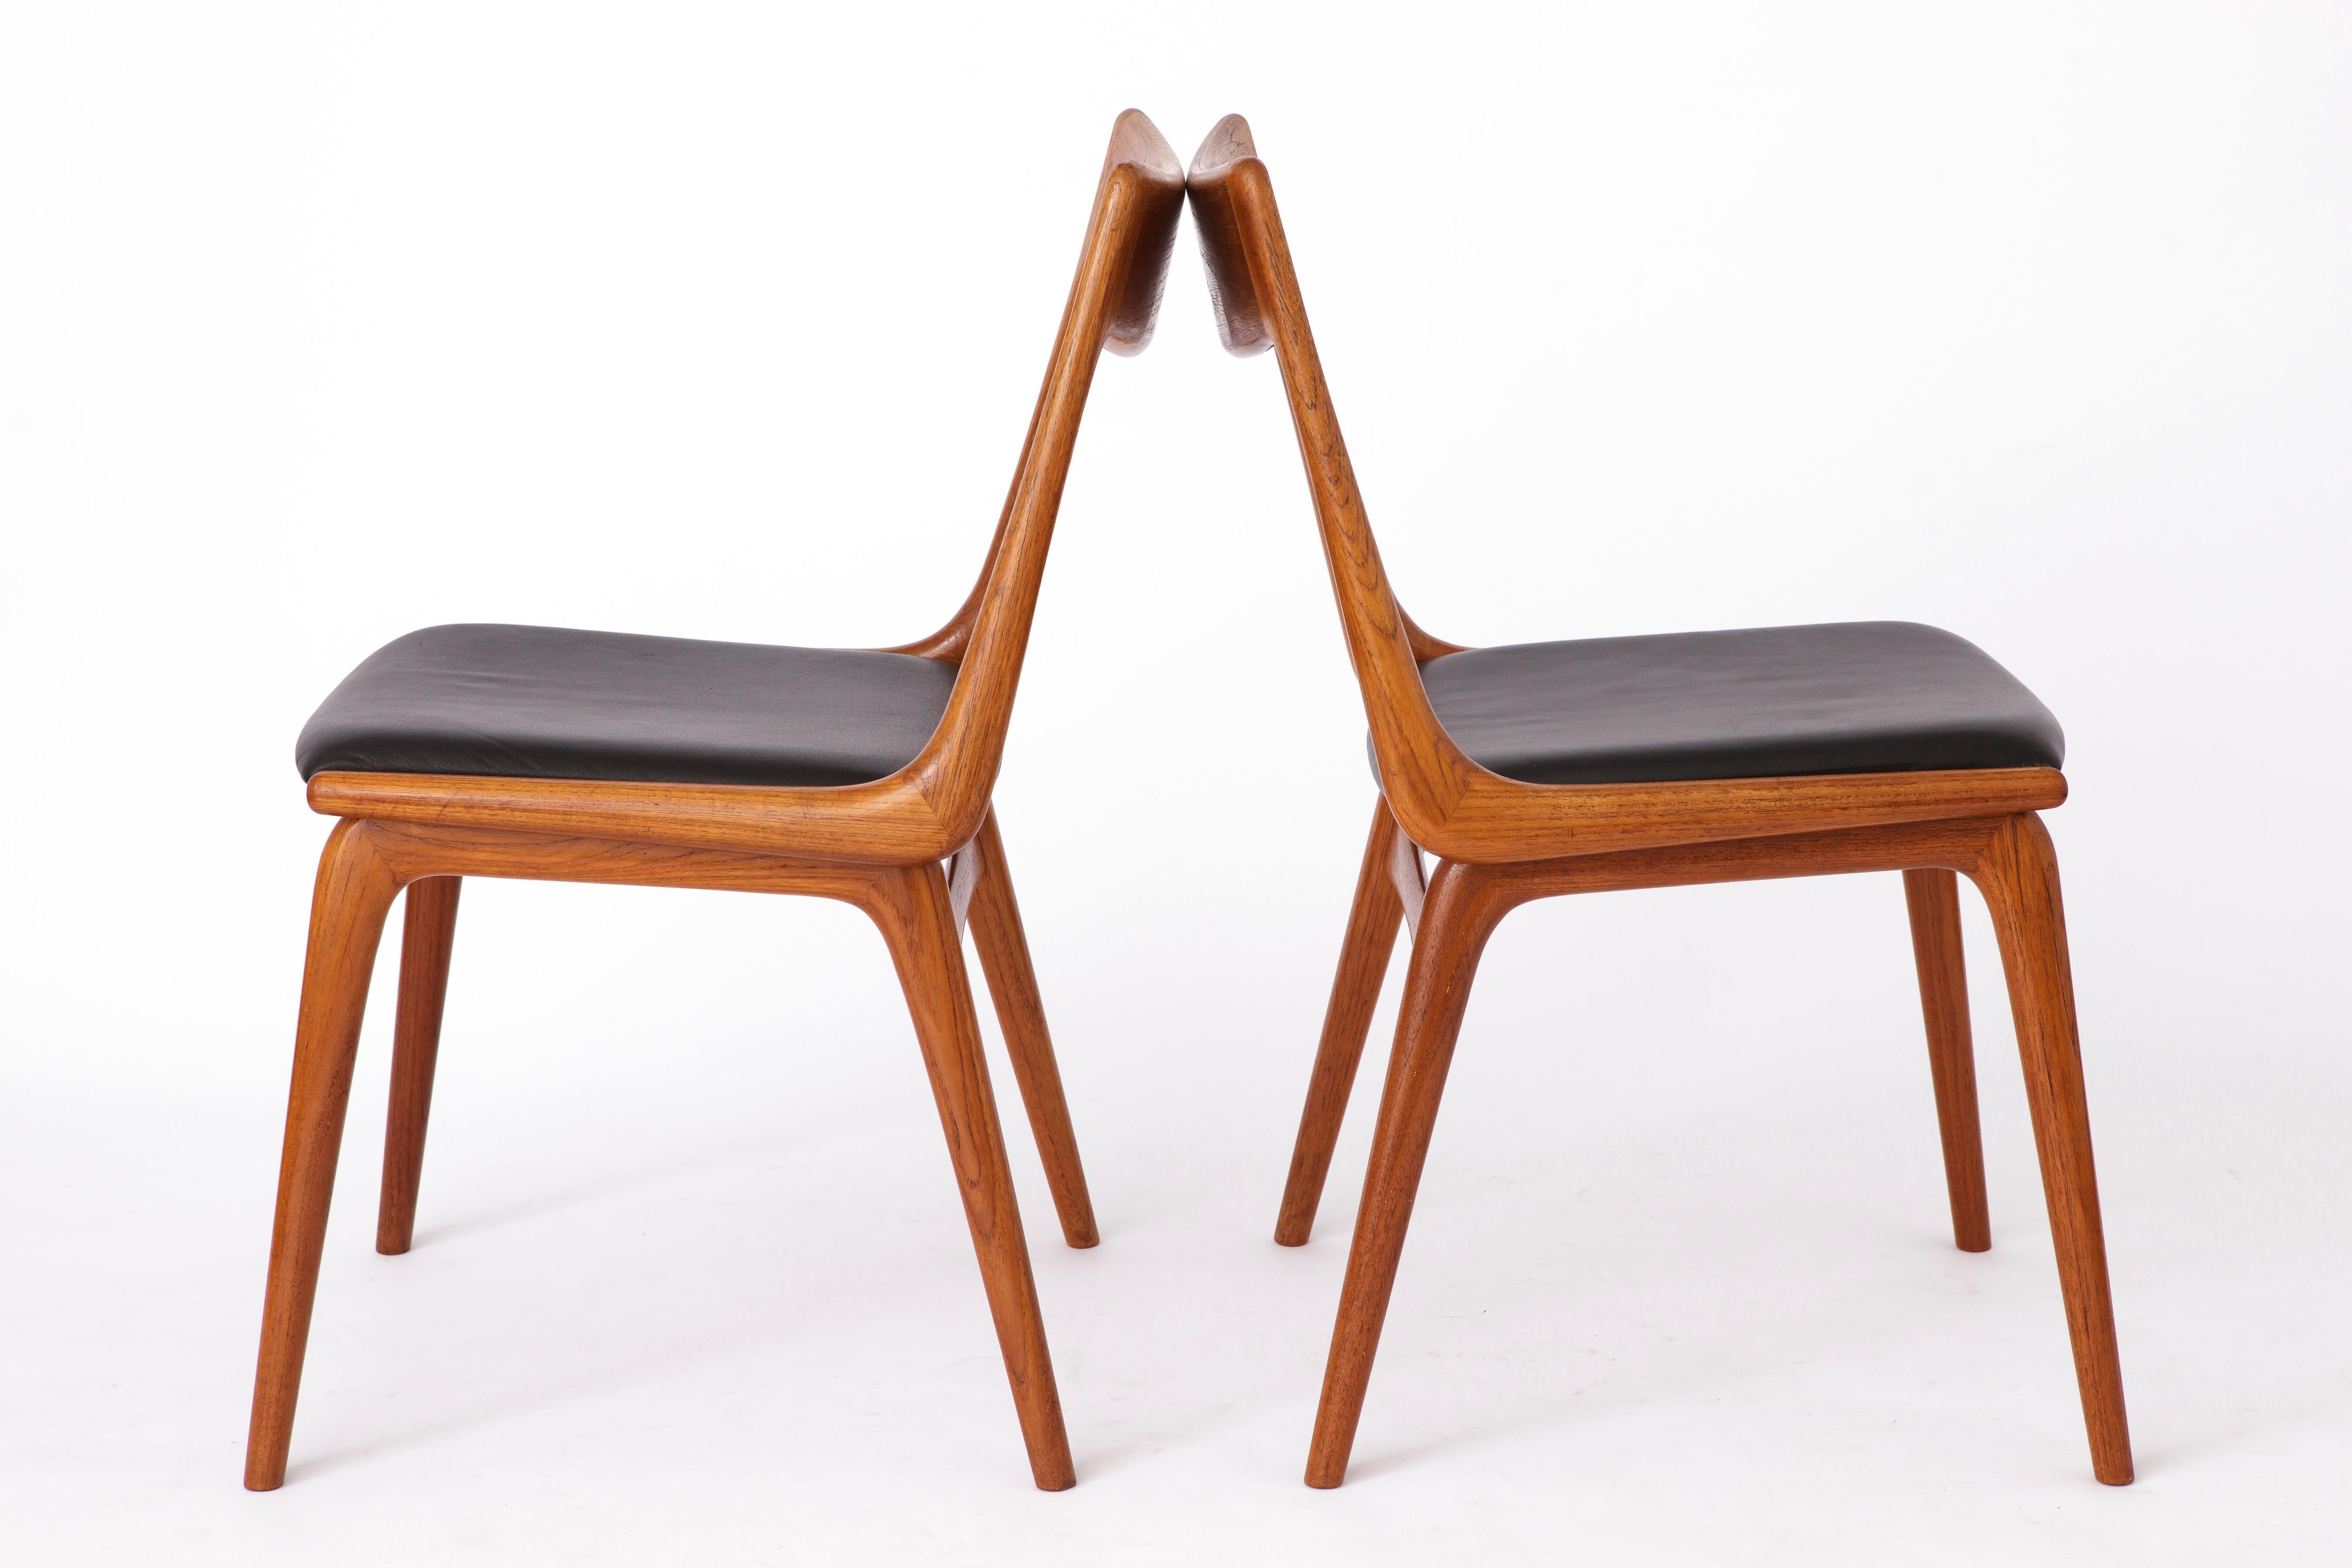 2 vintage midcentury chairs designed by Alfred Christensen for
manufacturer Slagelse Møbelværk. 
Production period: 1950s, Denmark. 
Displayed price is for a set of 2. Totally up to 5 chairs available. 

Very good condition. Stable teak frames.